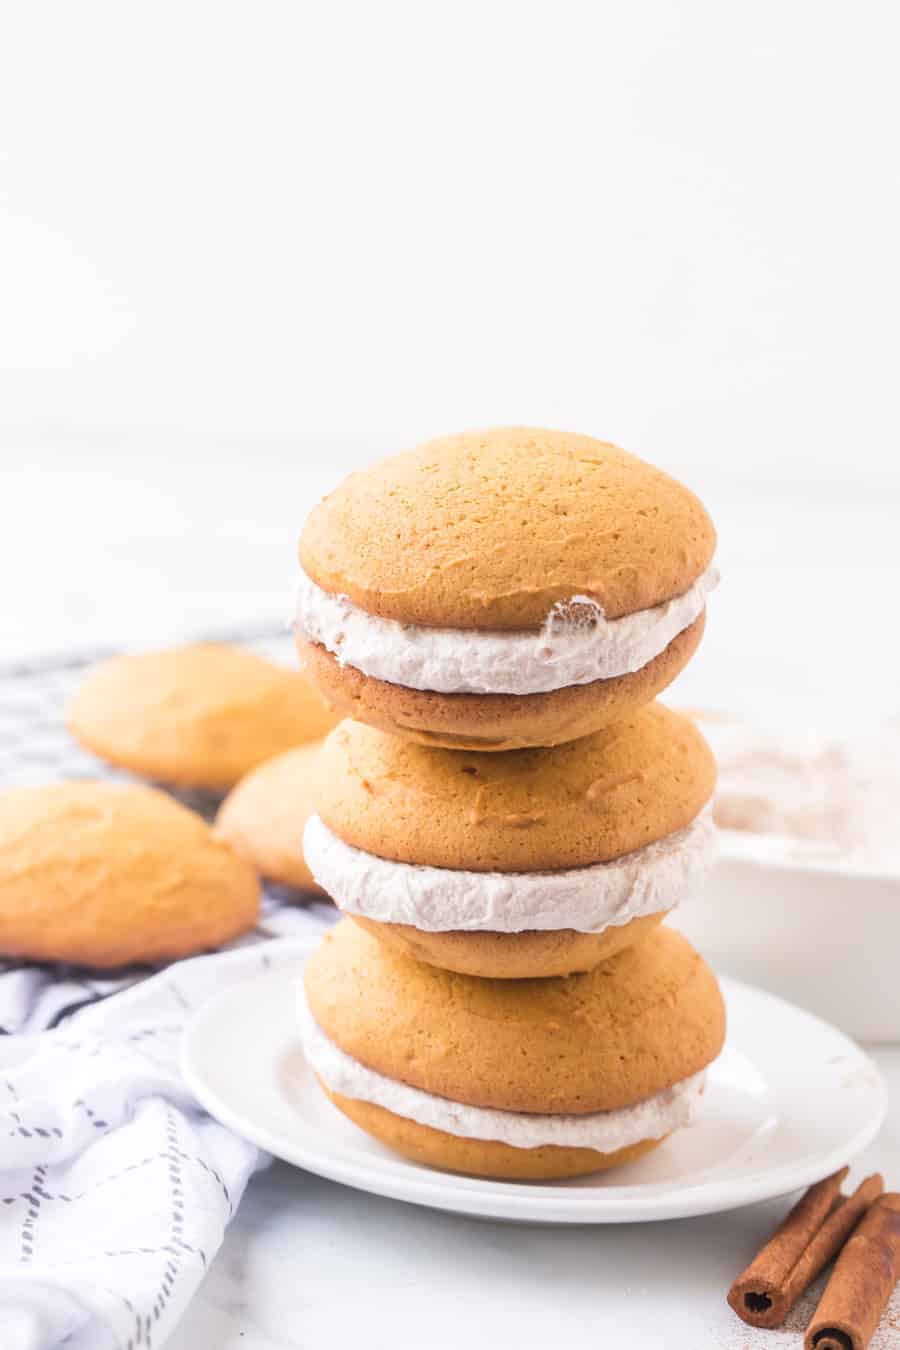 Brace yourselves for bites of heaven -- these pumpkin whoopie pies with whipped cinnamon filling are the perfectly sweet and soft, cream-filled cookie sandwiches you need this fall... and probably year-round, too. #whoopiepie #whoopiepierecipe #pumpkinwhoopiepie #pumpkin #pumkpindessert #pumpkinrecipe